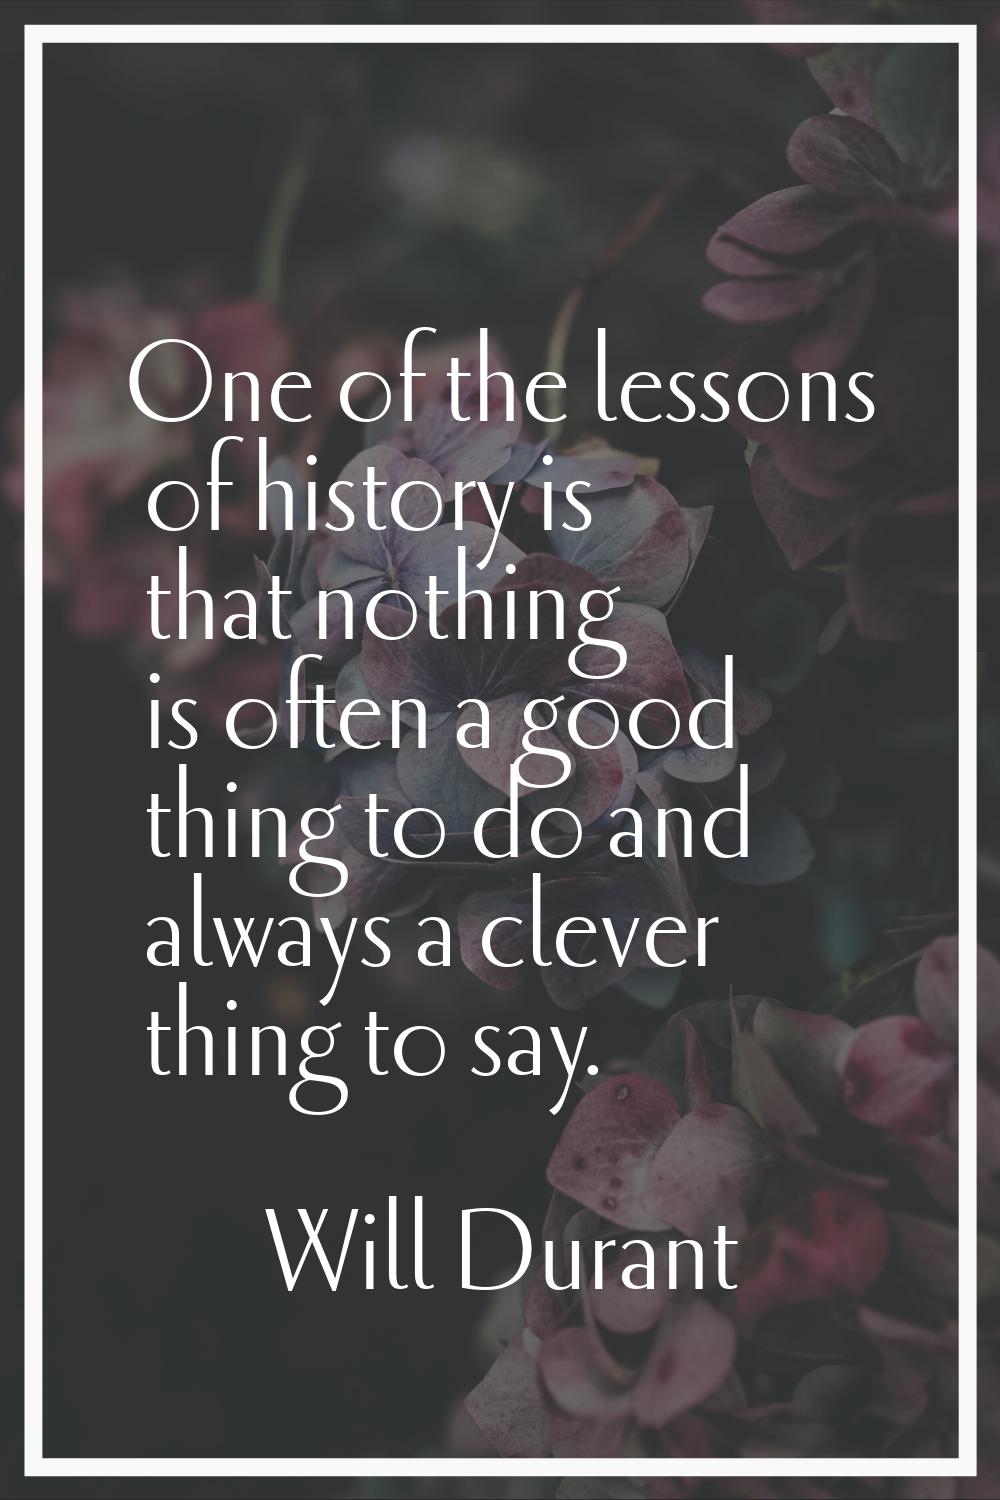 One of the lessons of history is that nothing is often a good thing to do and always a clever thing